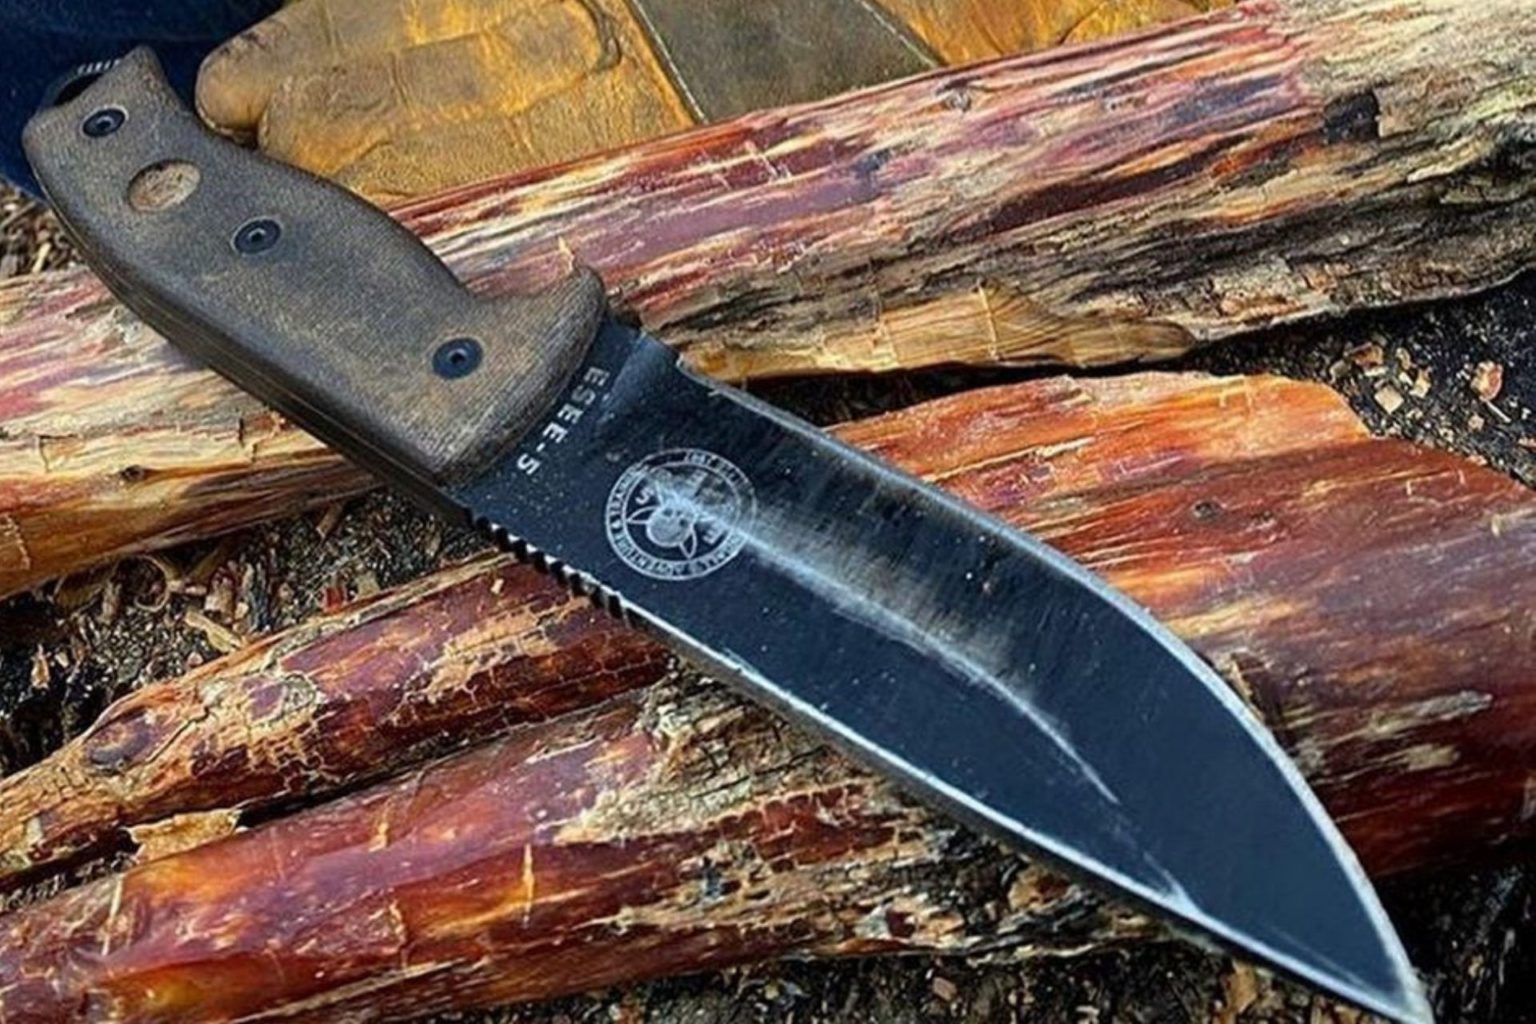 File:ESEE-5-Knife-Review-Tactical-Survival-Knife-1536x1024.jpg